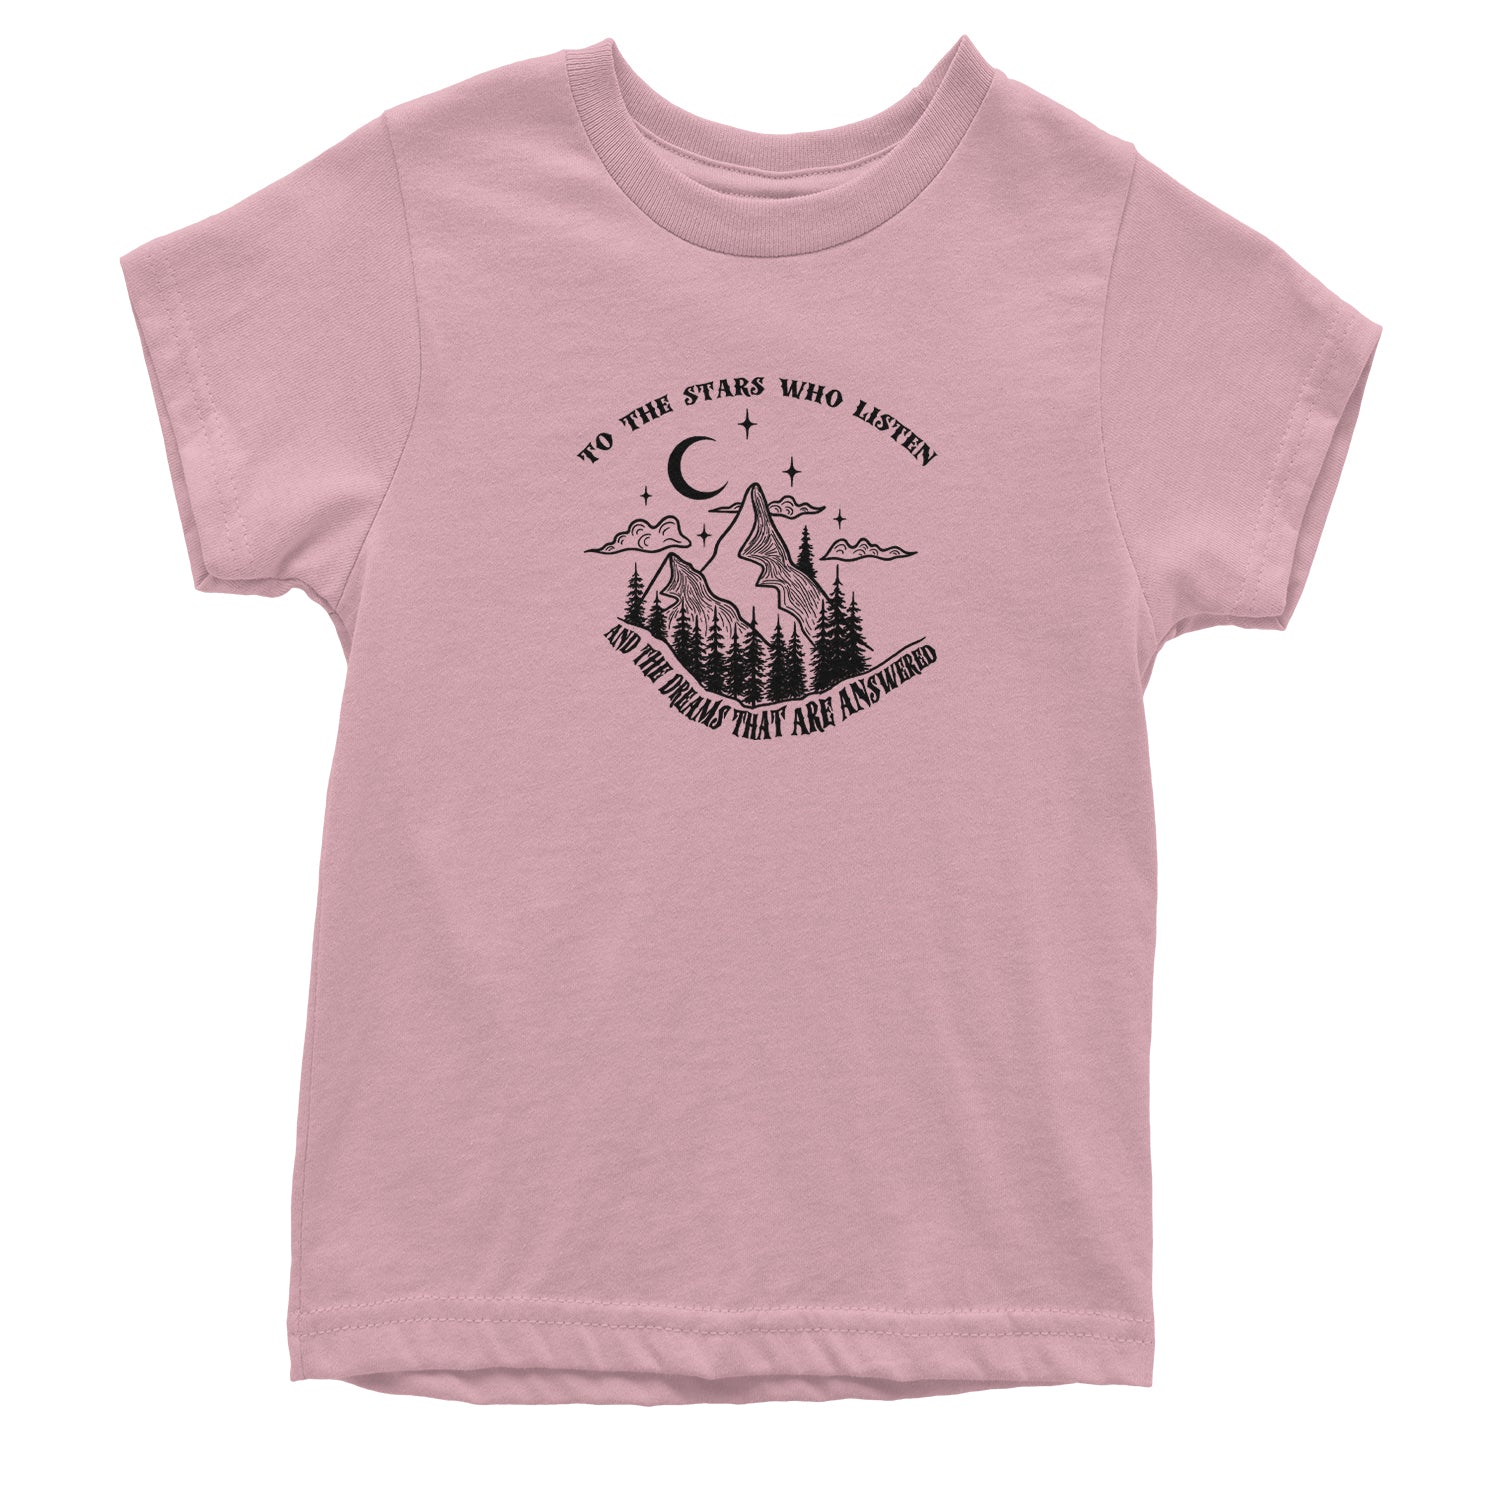 To The Stars Who Listen… ACOTAR Quote Youth T-shirt acotar, court, tamlin, thorns by Expression Tees